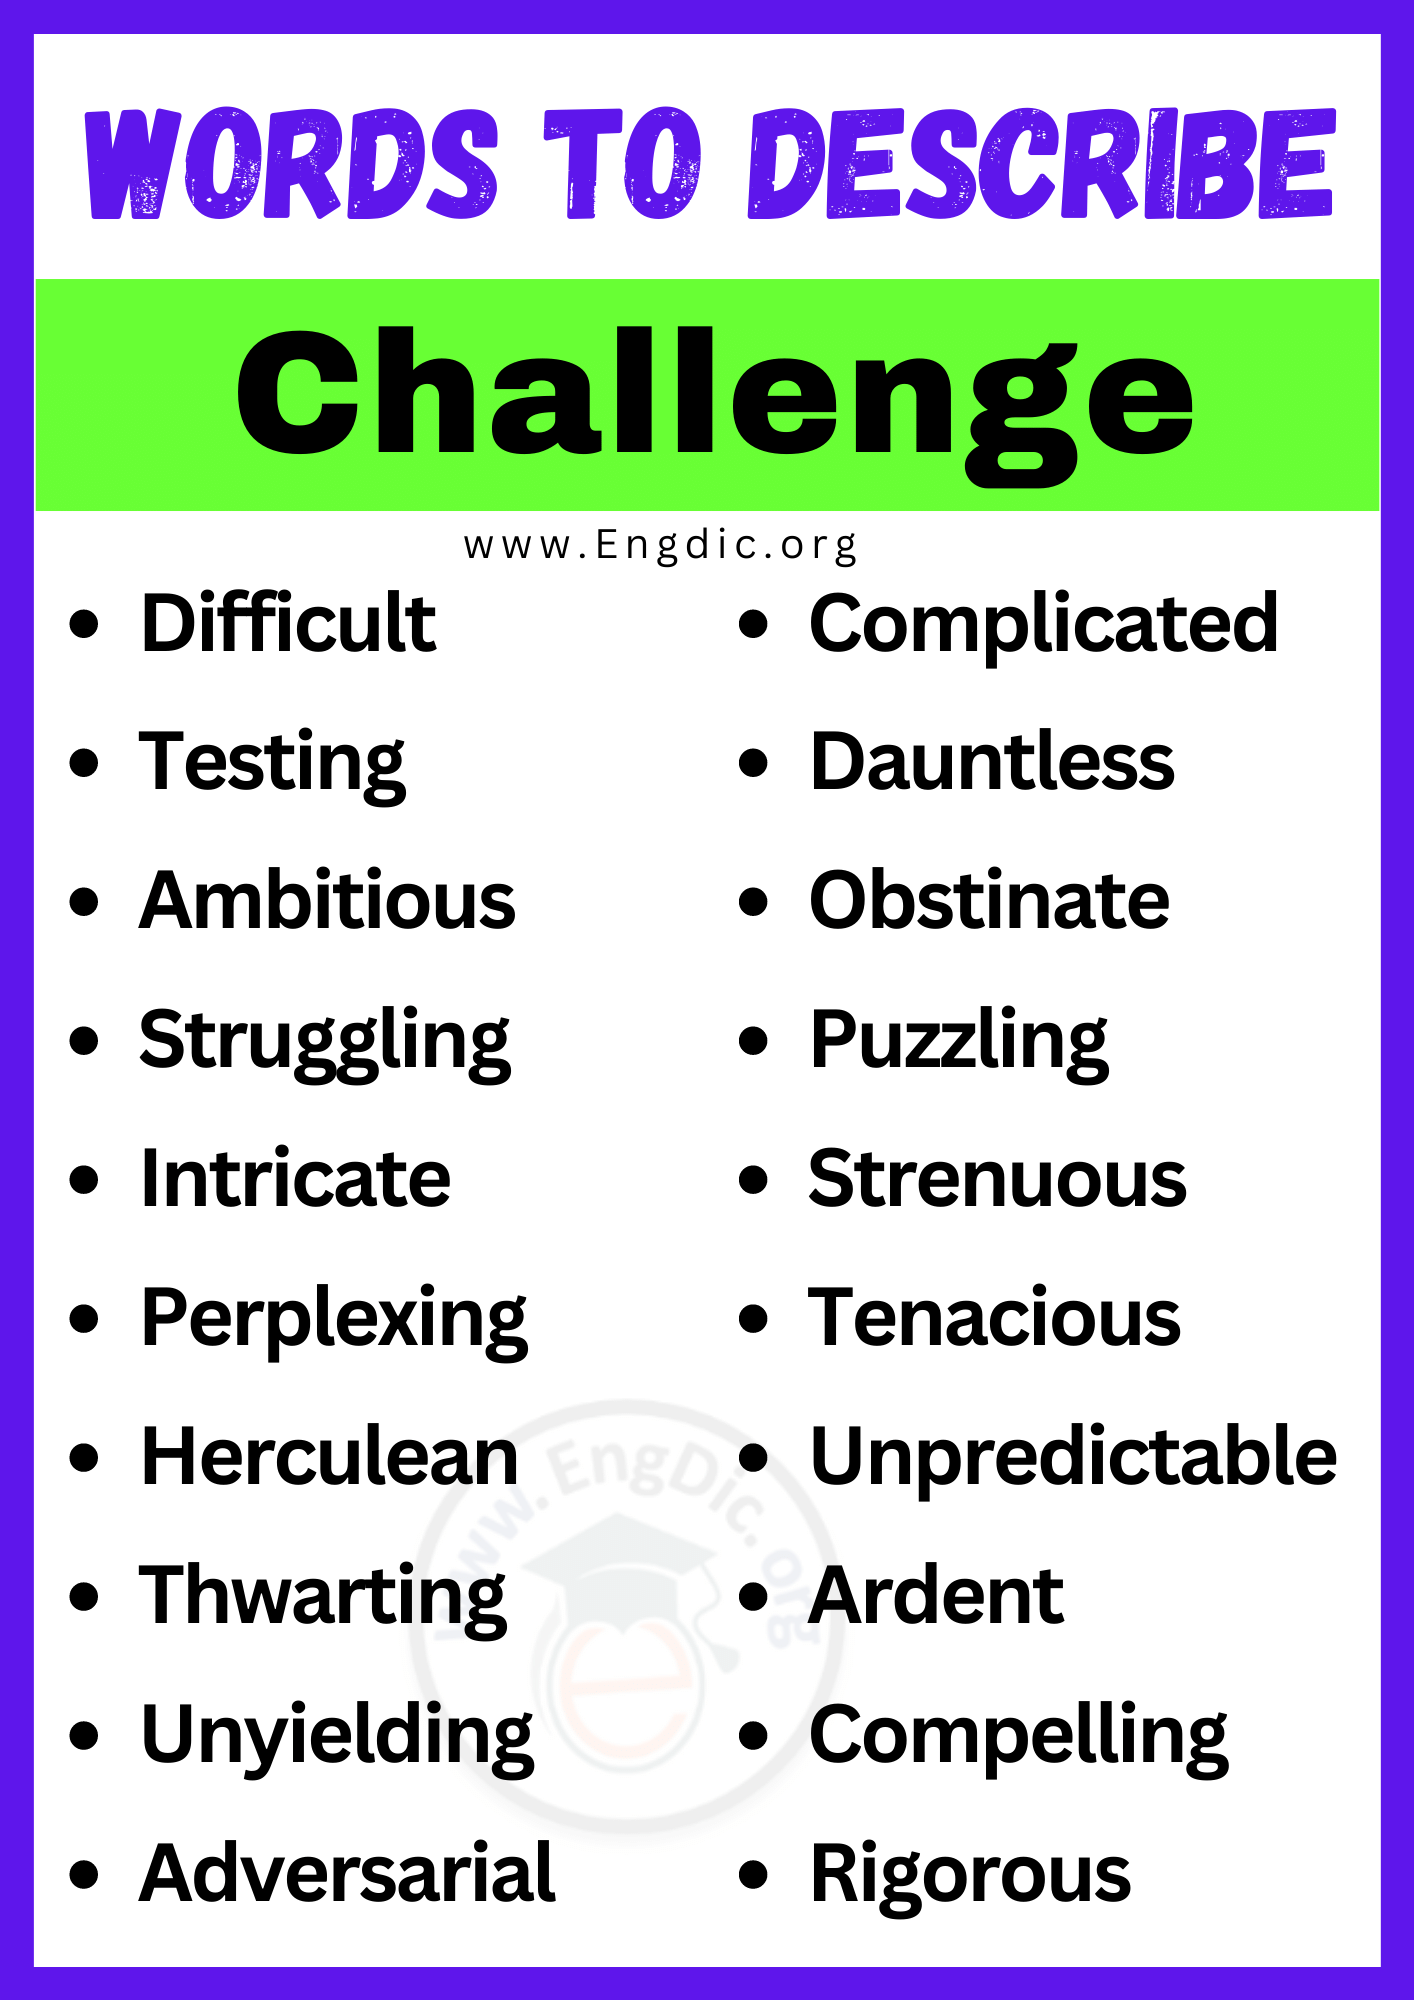 Words to Describe Challenge